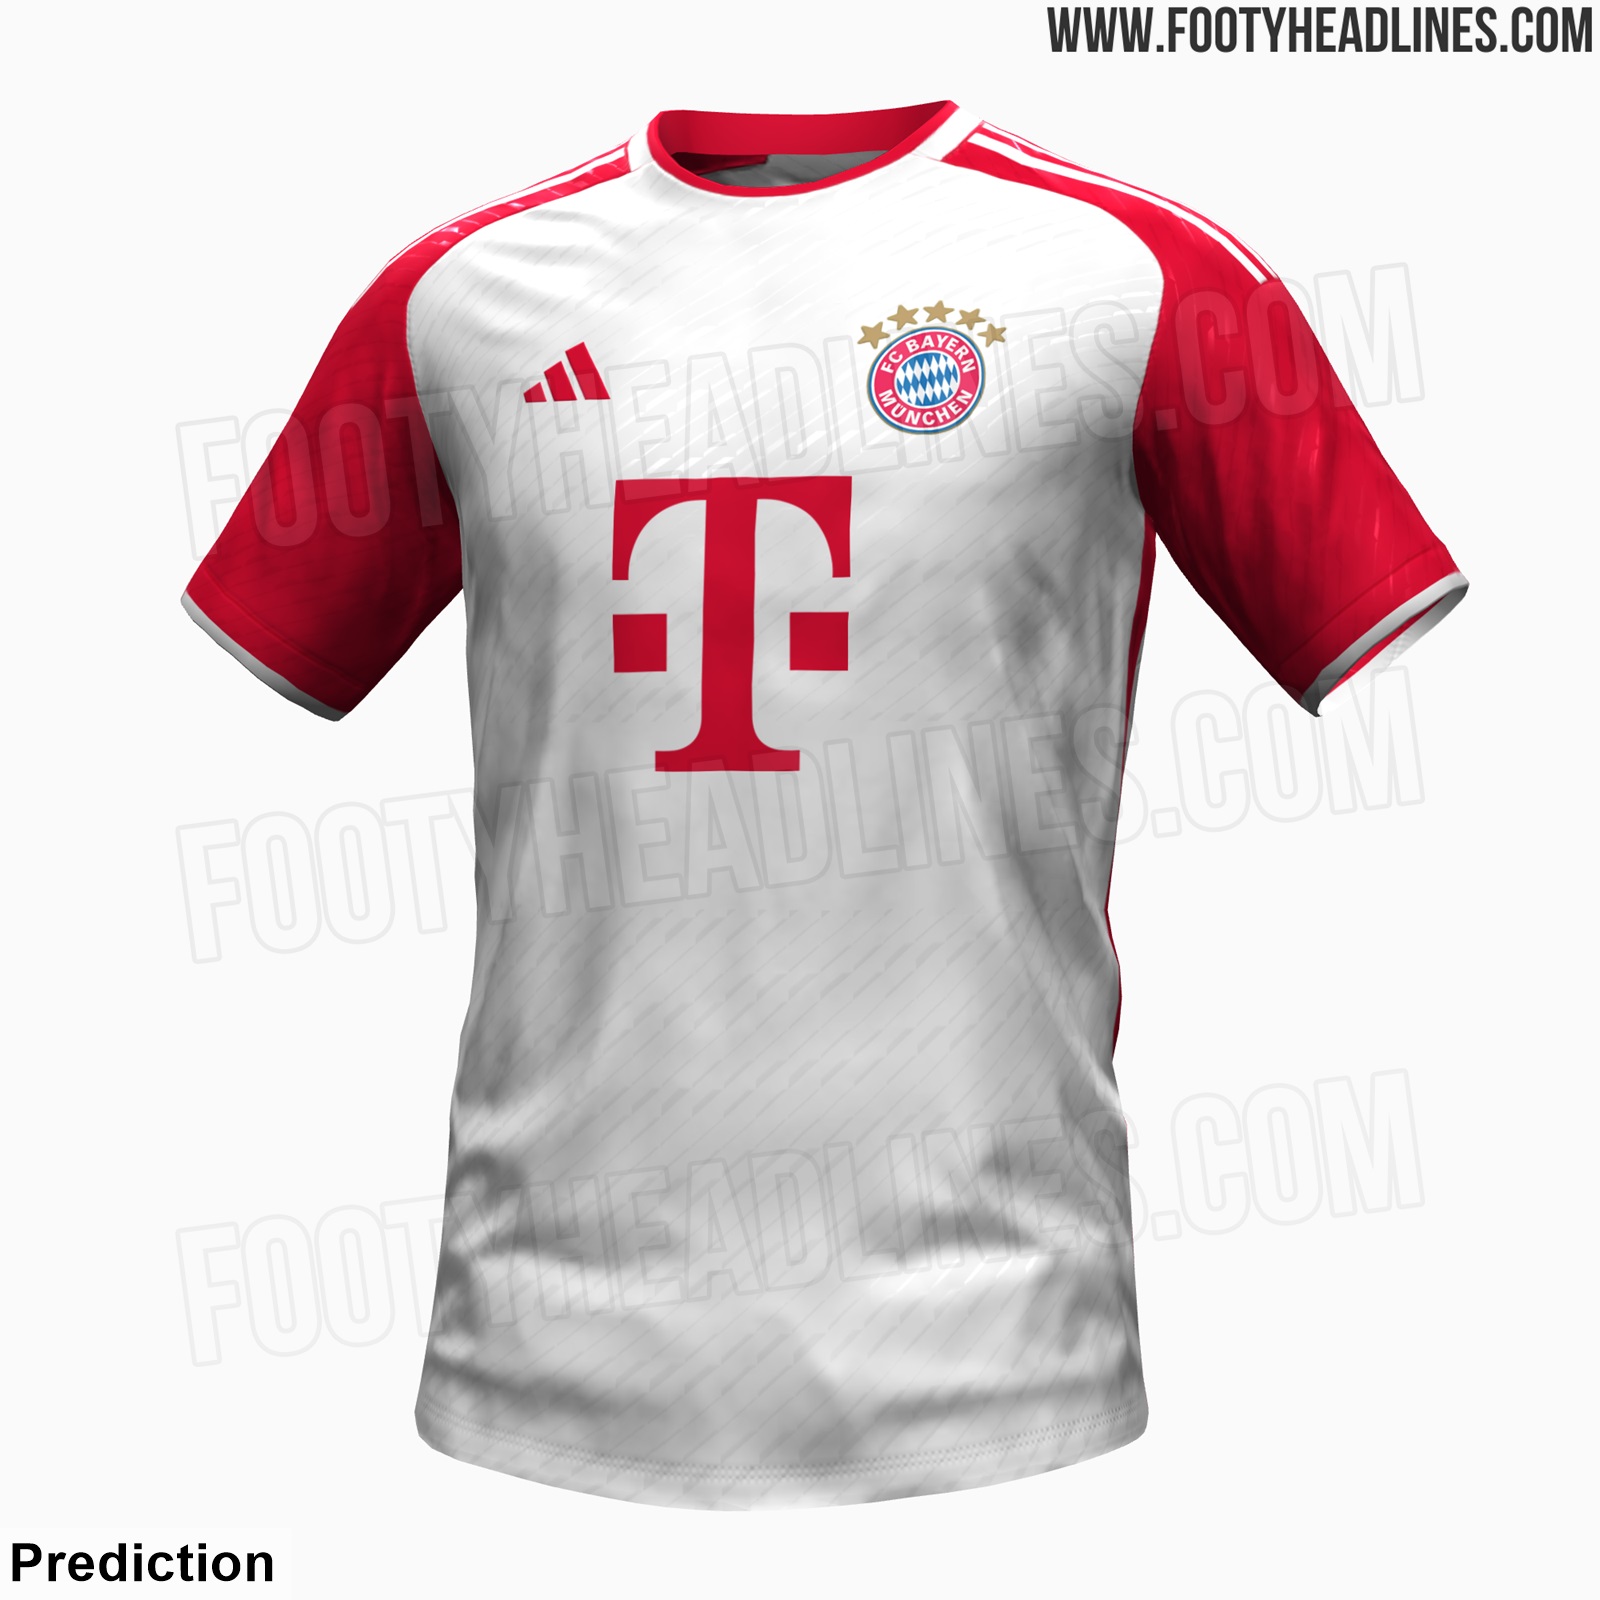 CONFIRMED Bayern München 2324 Home Kit to Feature "Revolutionary